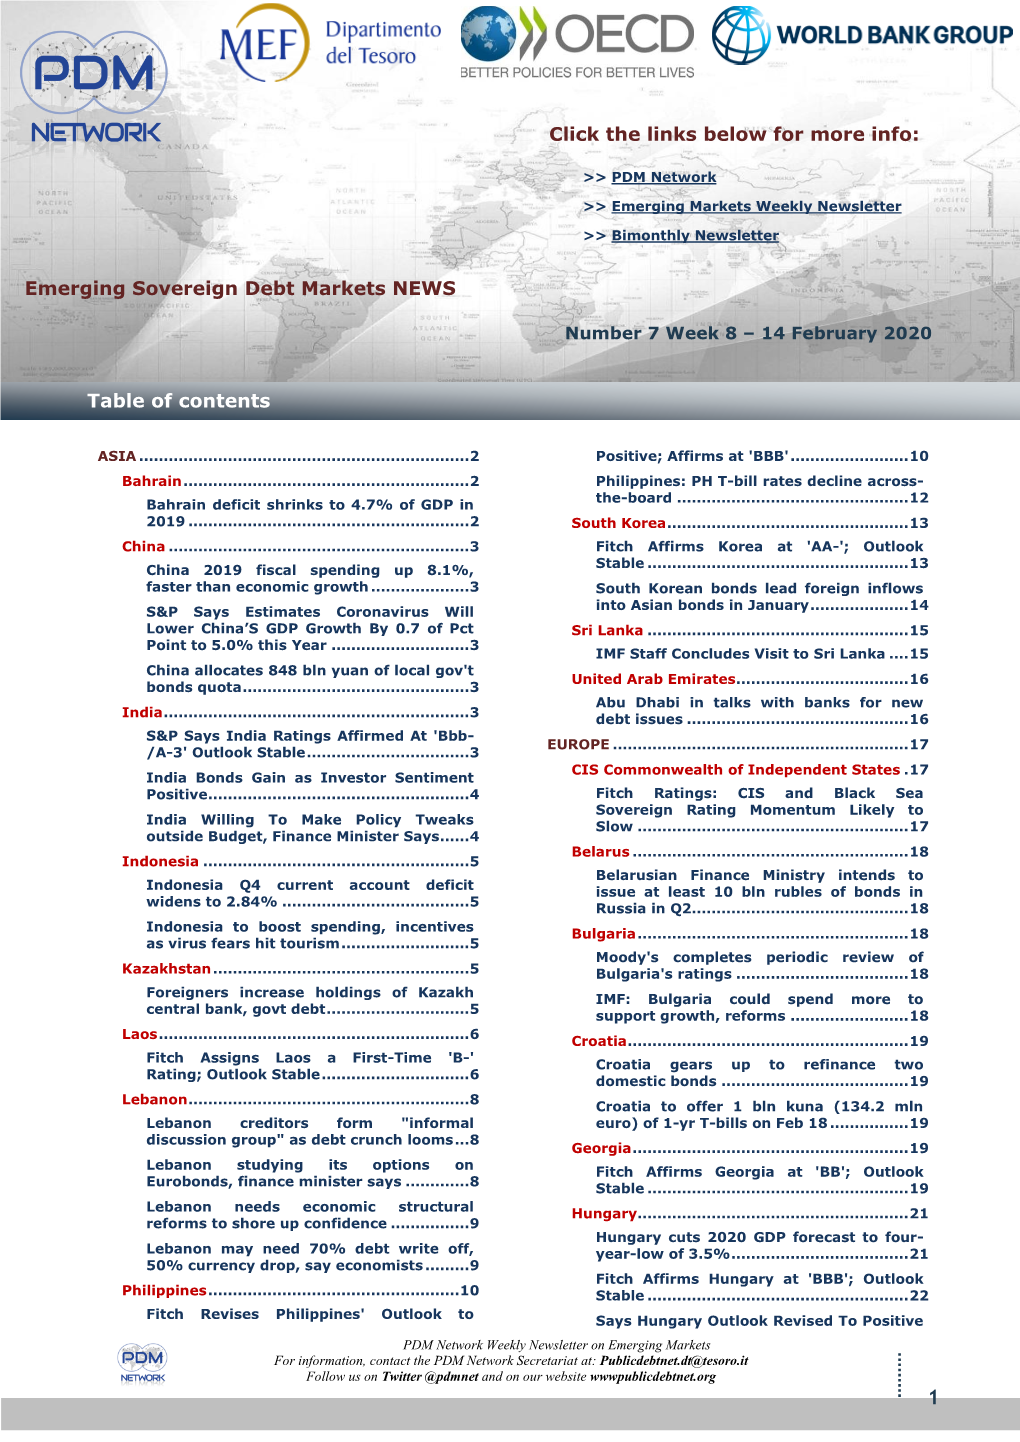 Emerging Sovereign Debt Markets NEWS Table of Contents